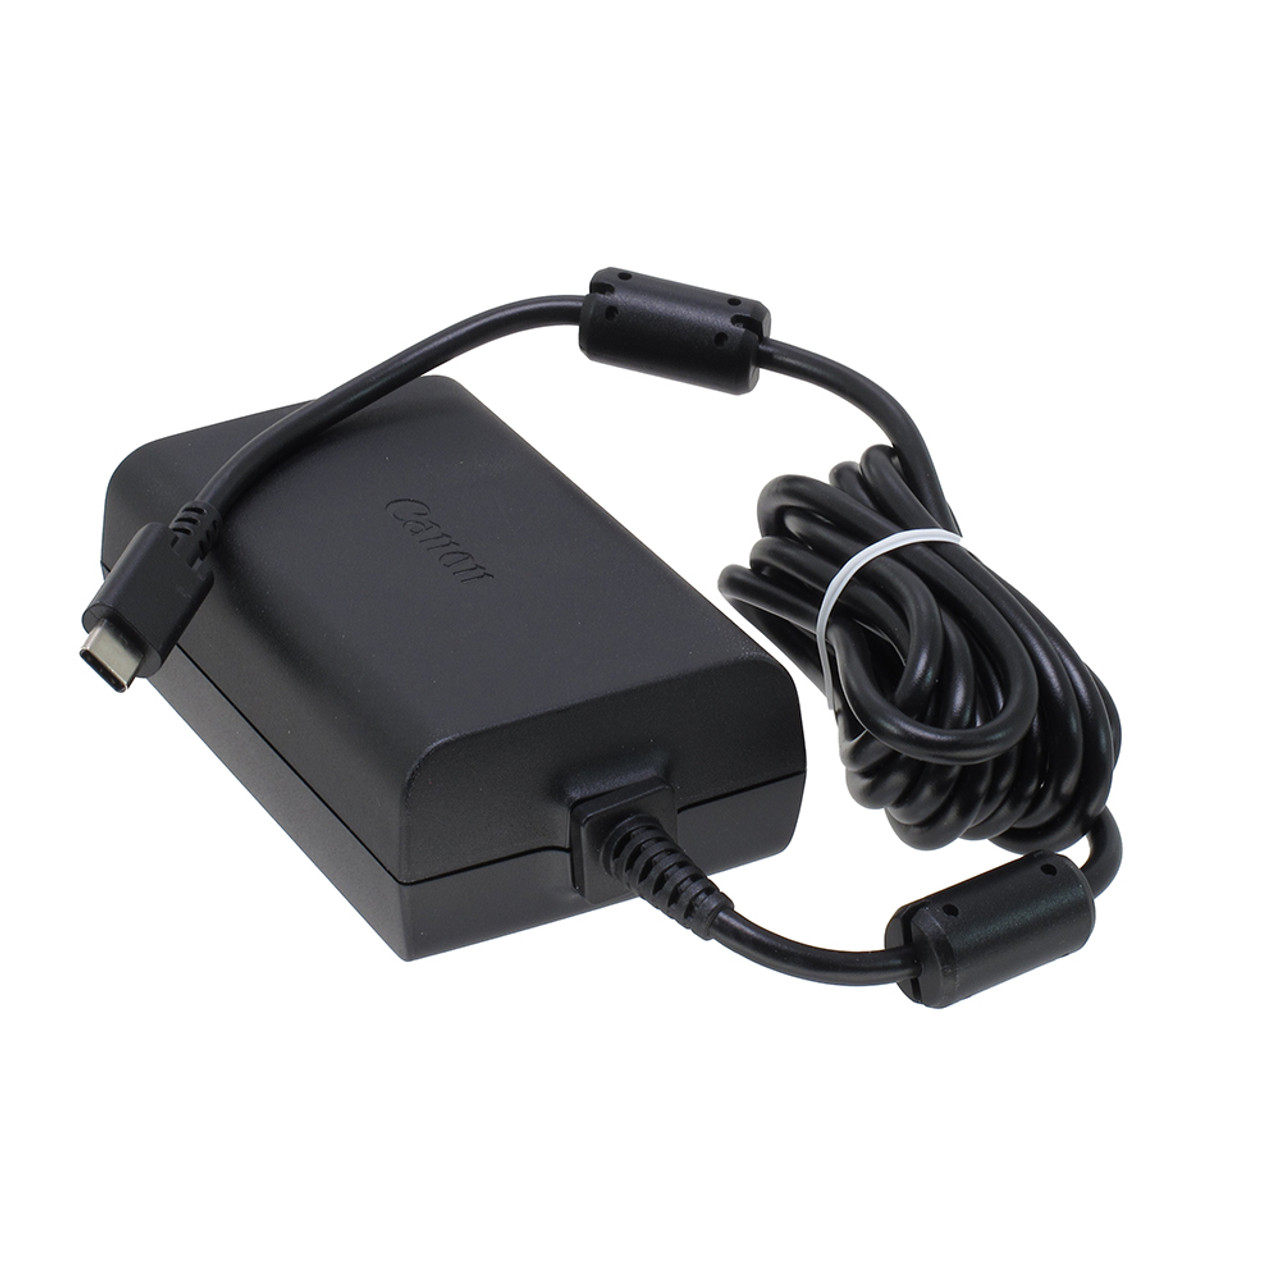 USED CANON PD-E1 USB POWER ADAPTER